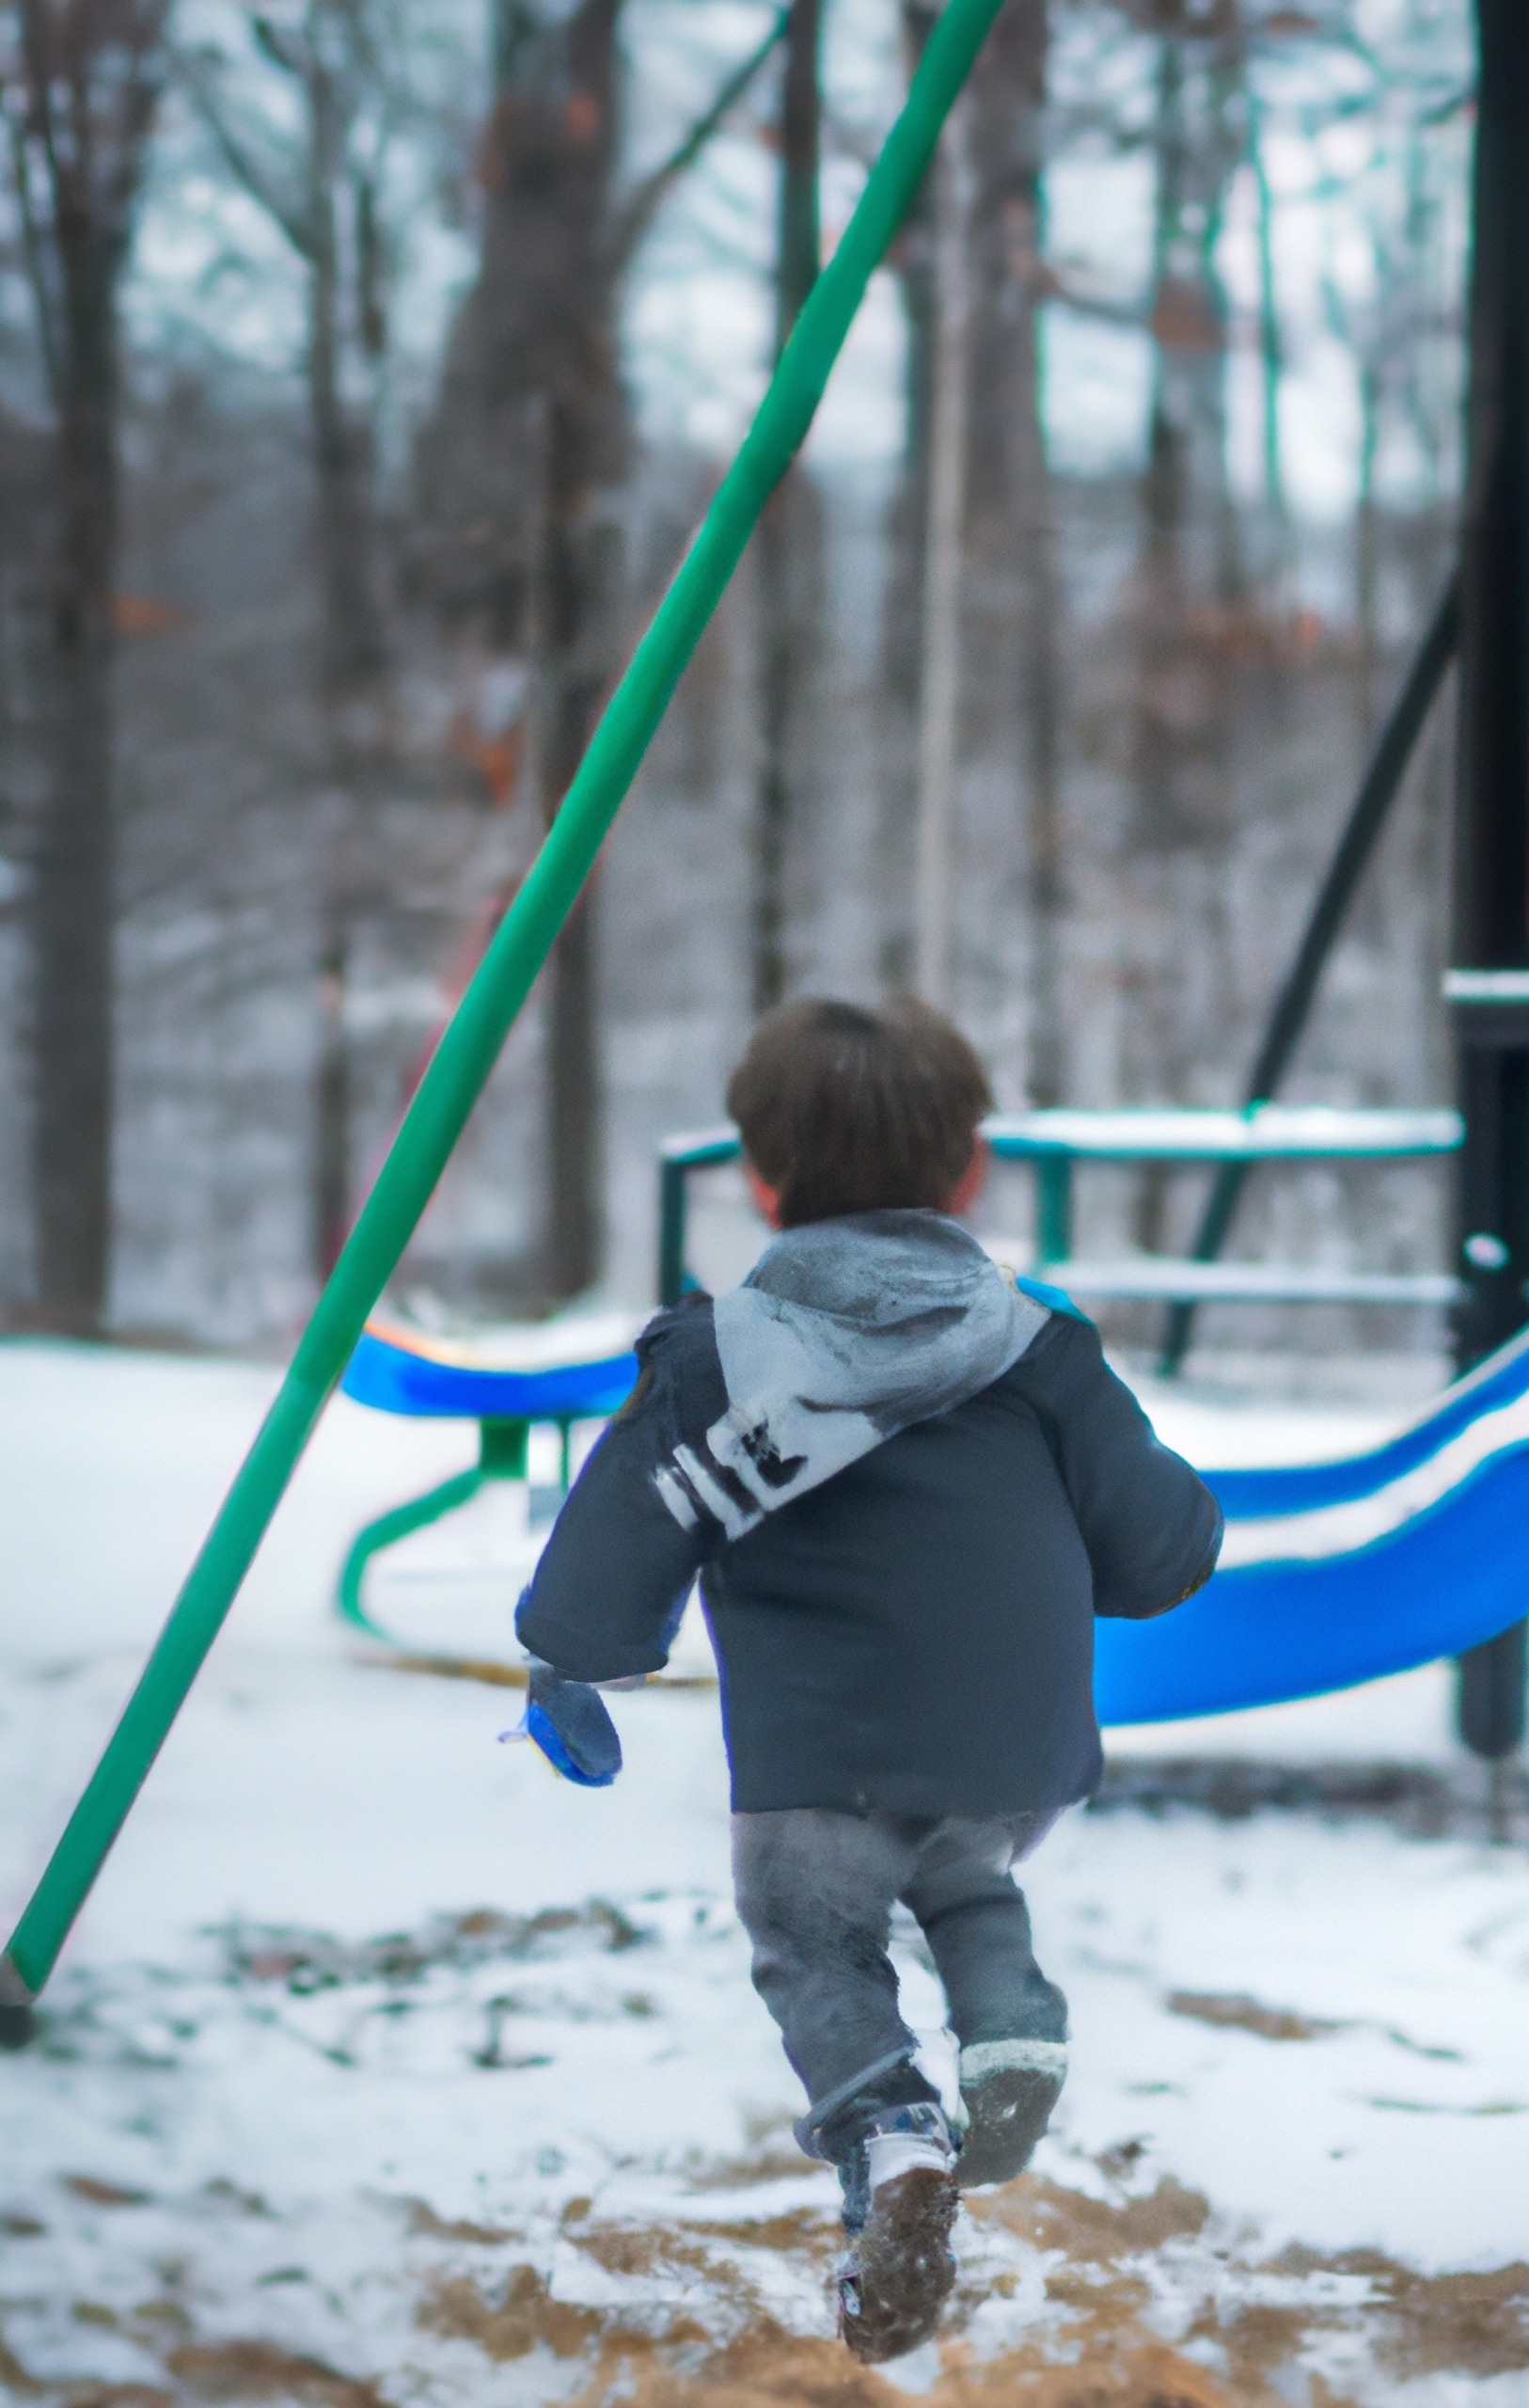 Homelessness in Massachusetts: Young boy in heavy winter clothing suns towards colorful playground tots in snow-covered park with rall, bare trees in background.